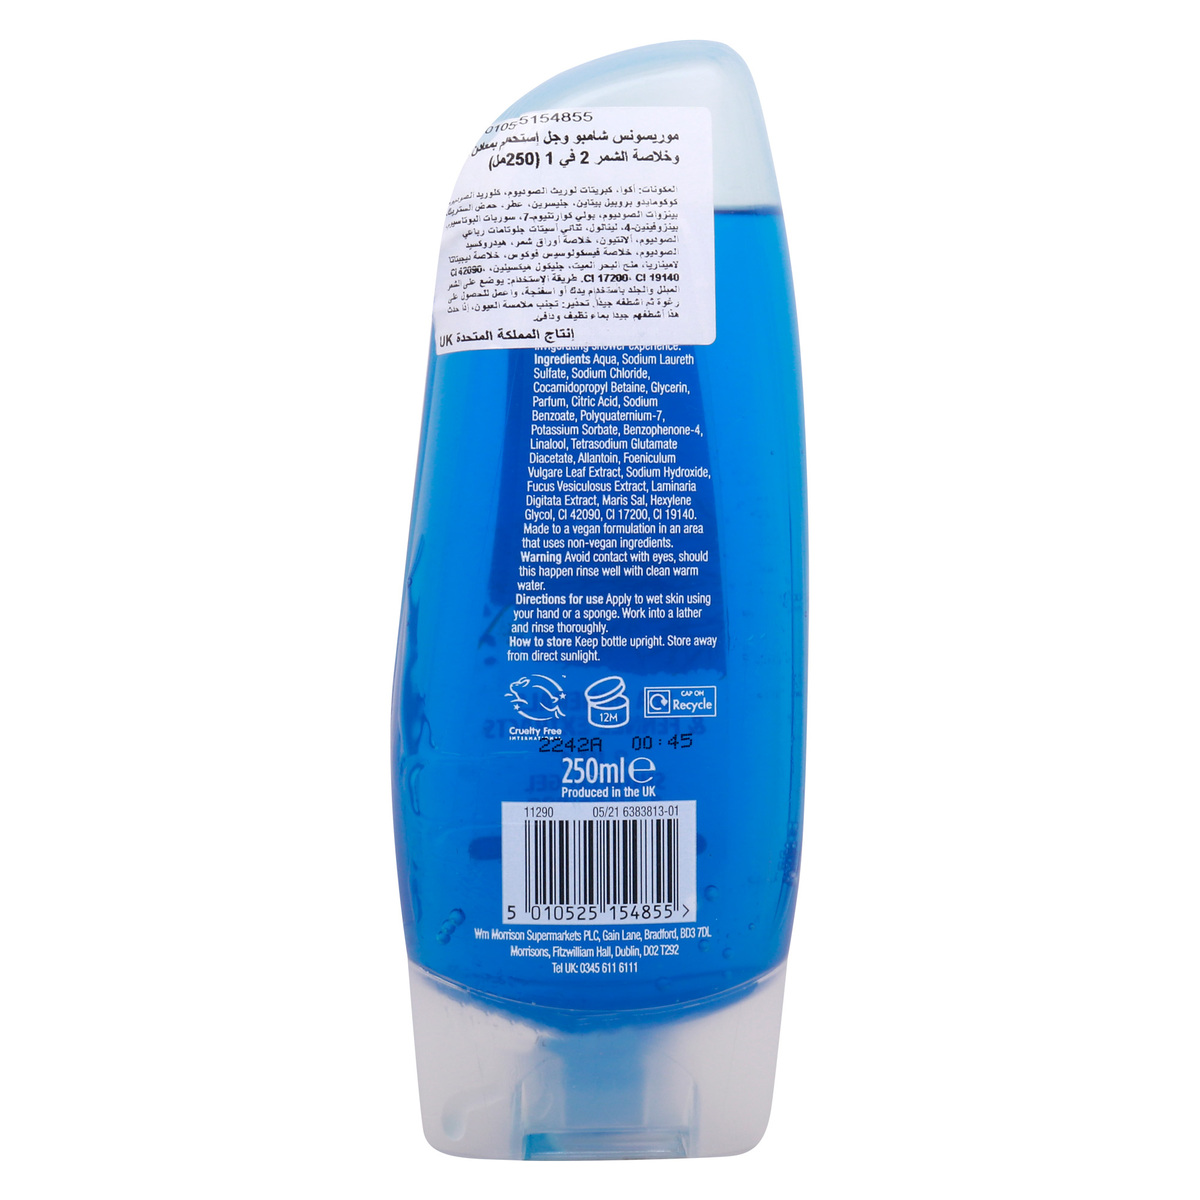 Morrisons 2in1 Shower Gel & Shampoo Sea Minerals & Fennel Extracts, 250 ml